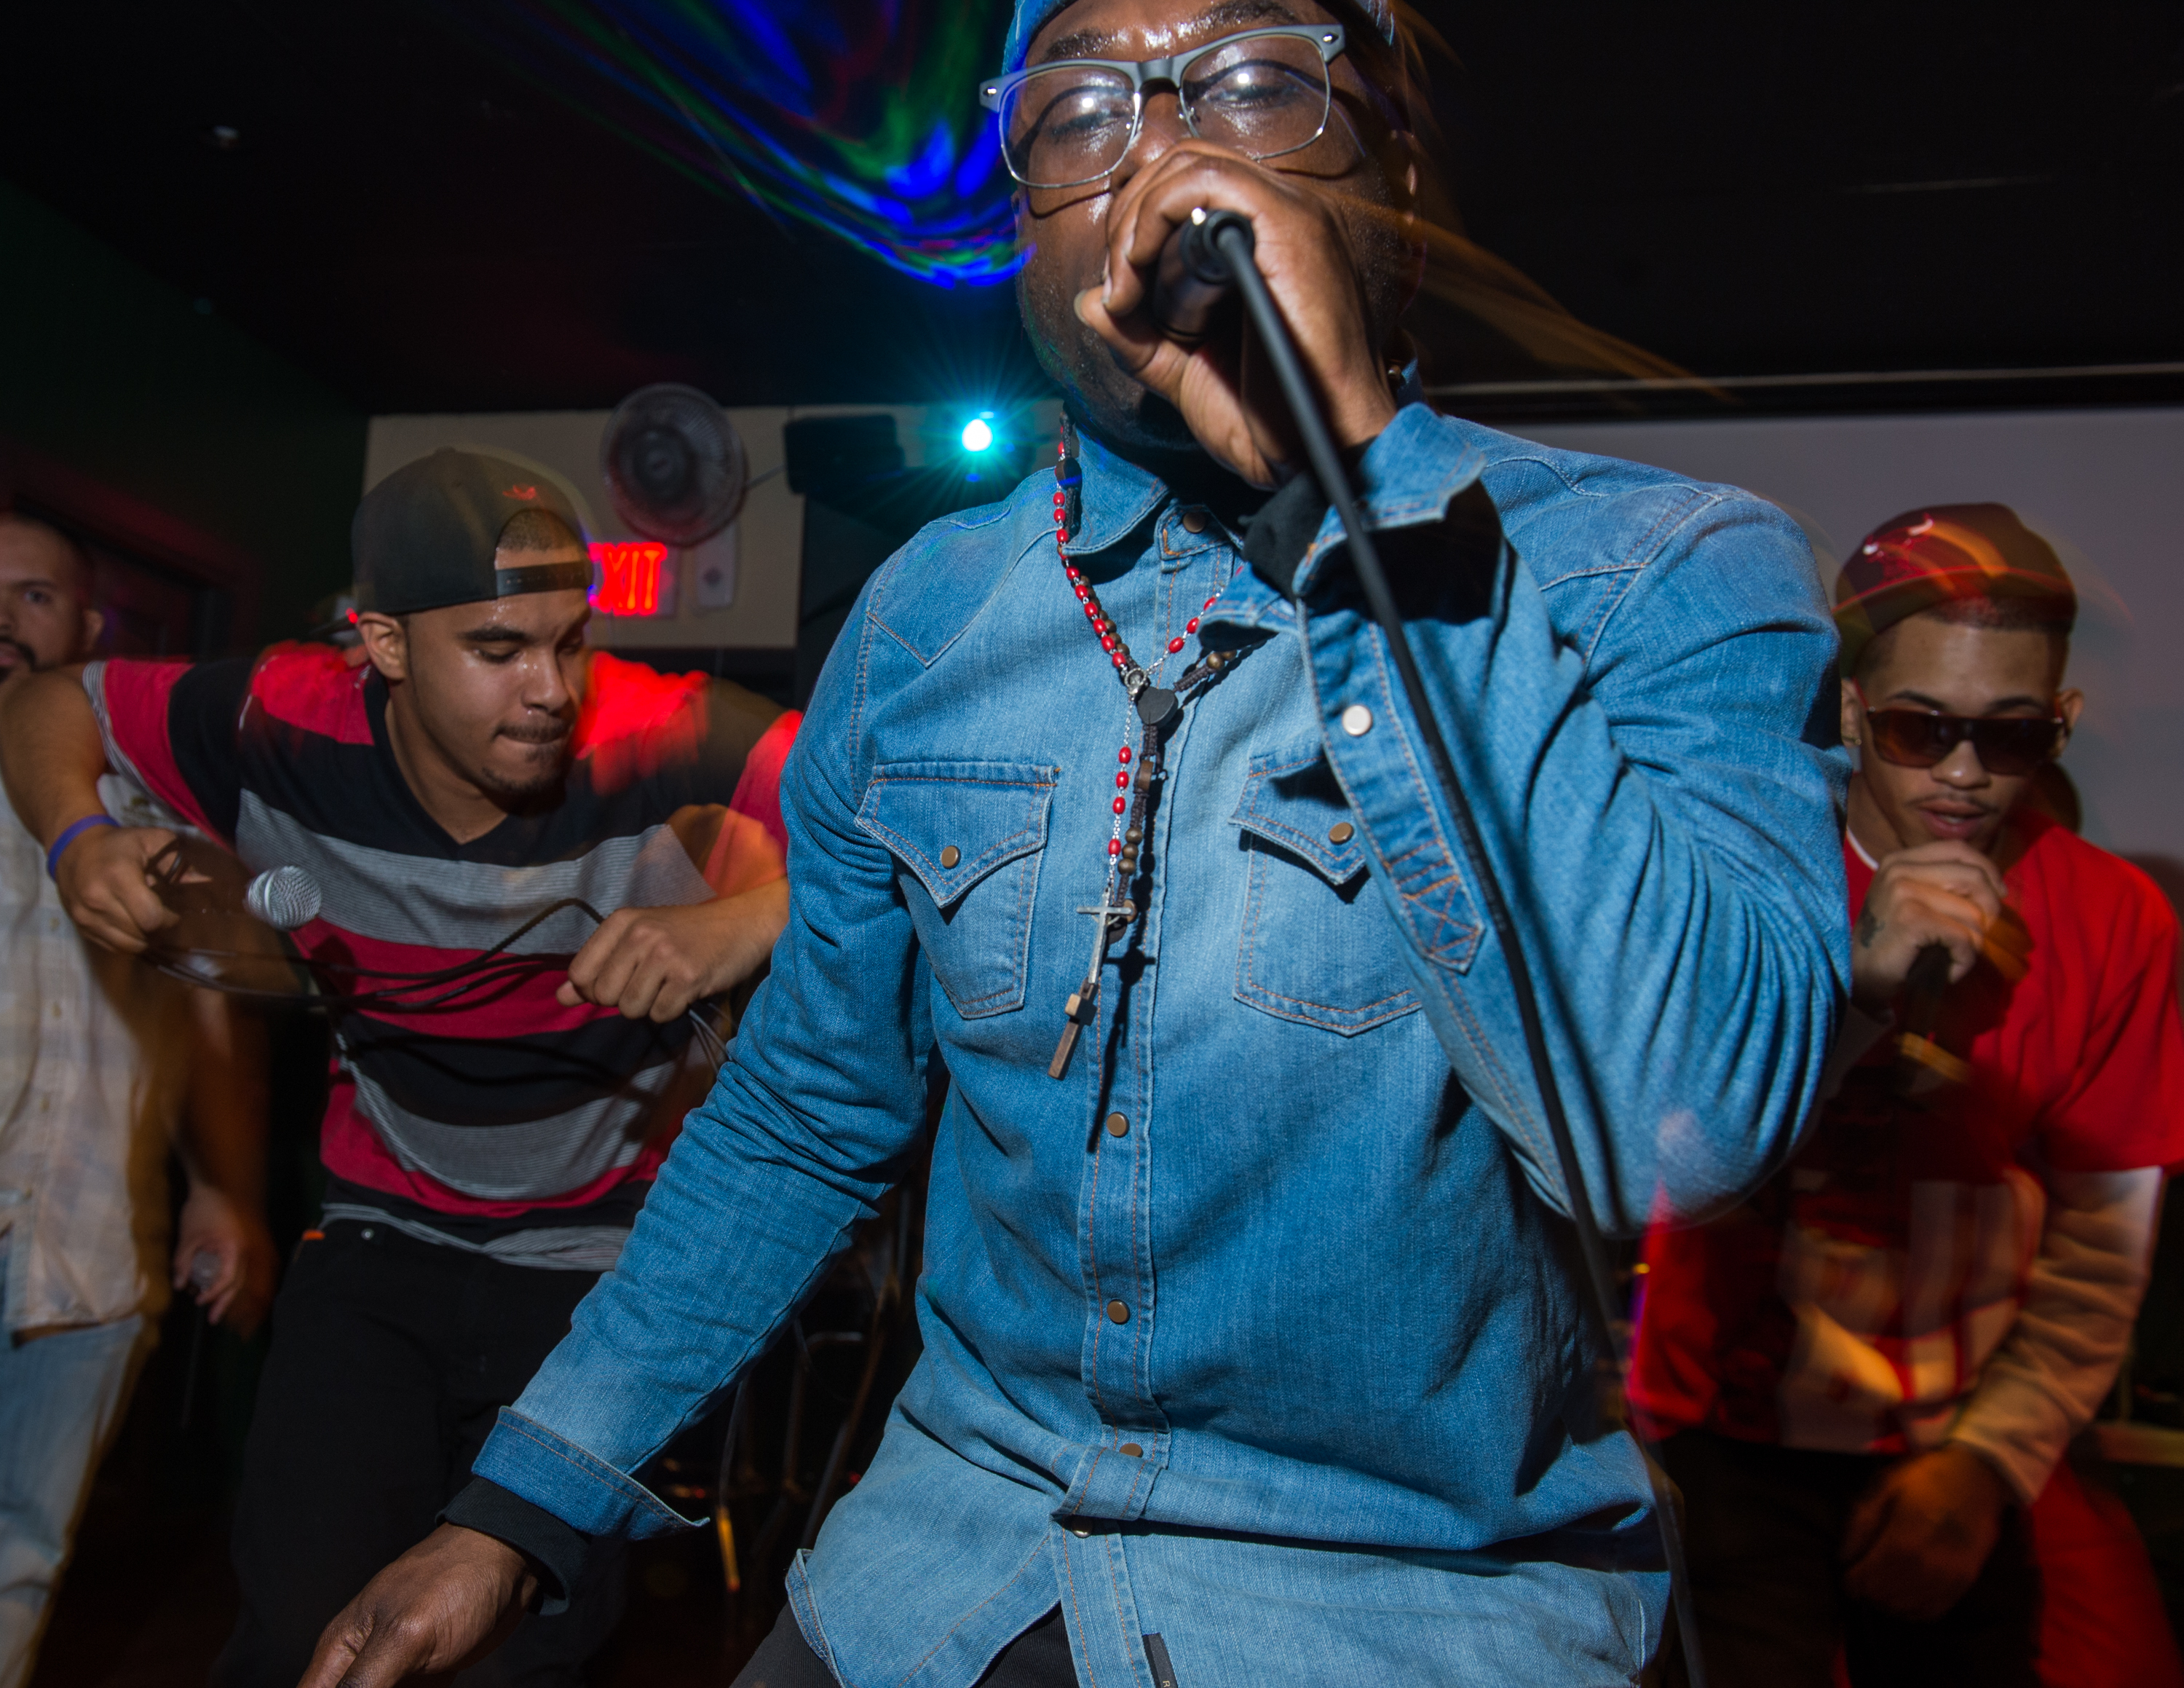 JBain DaStar (Center), of Rochester, NY, performs with group members Ricardo Murray (Left), of Rochester, NY, and Marcus Montreal (Right), of Rochester, NY, at the Thirsty Frog, in Irondequoit, NY, on April 28, 2014.  They are members of New Tren Gang, an aspiring hip-hop group founded in Rochester, NY, and this was their second live performance. Photo by David Falconieri